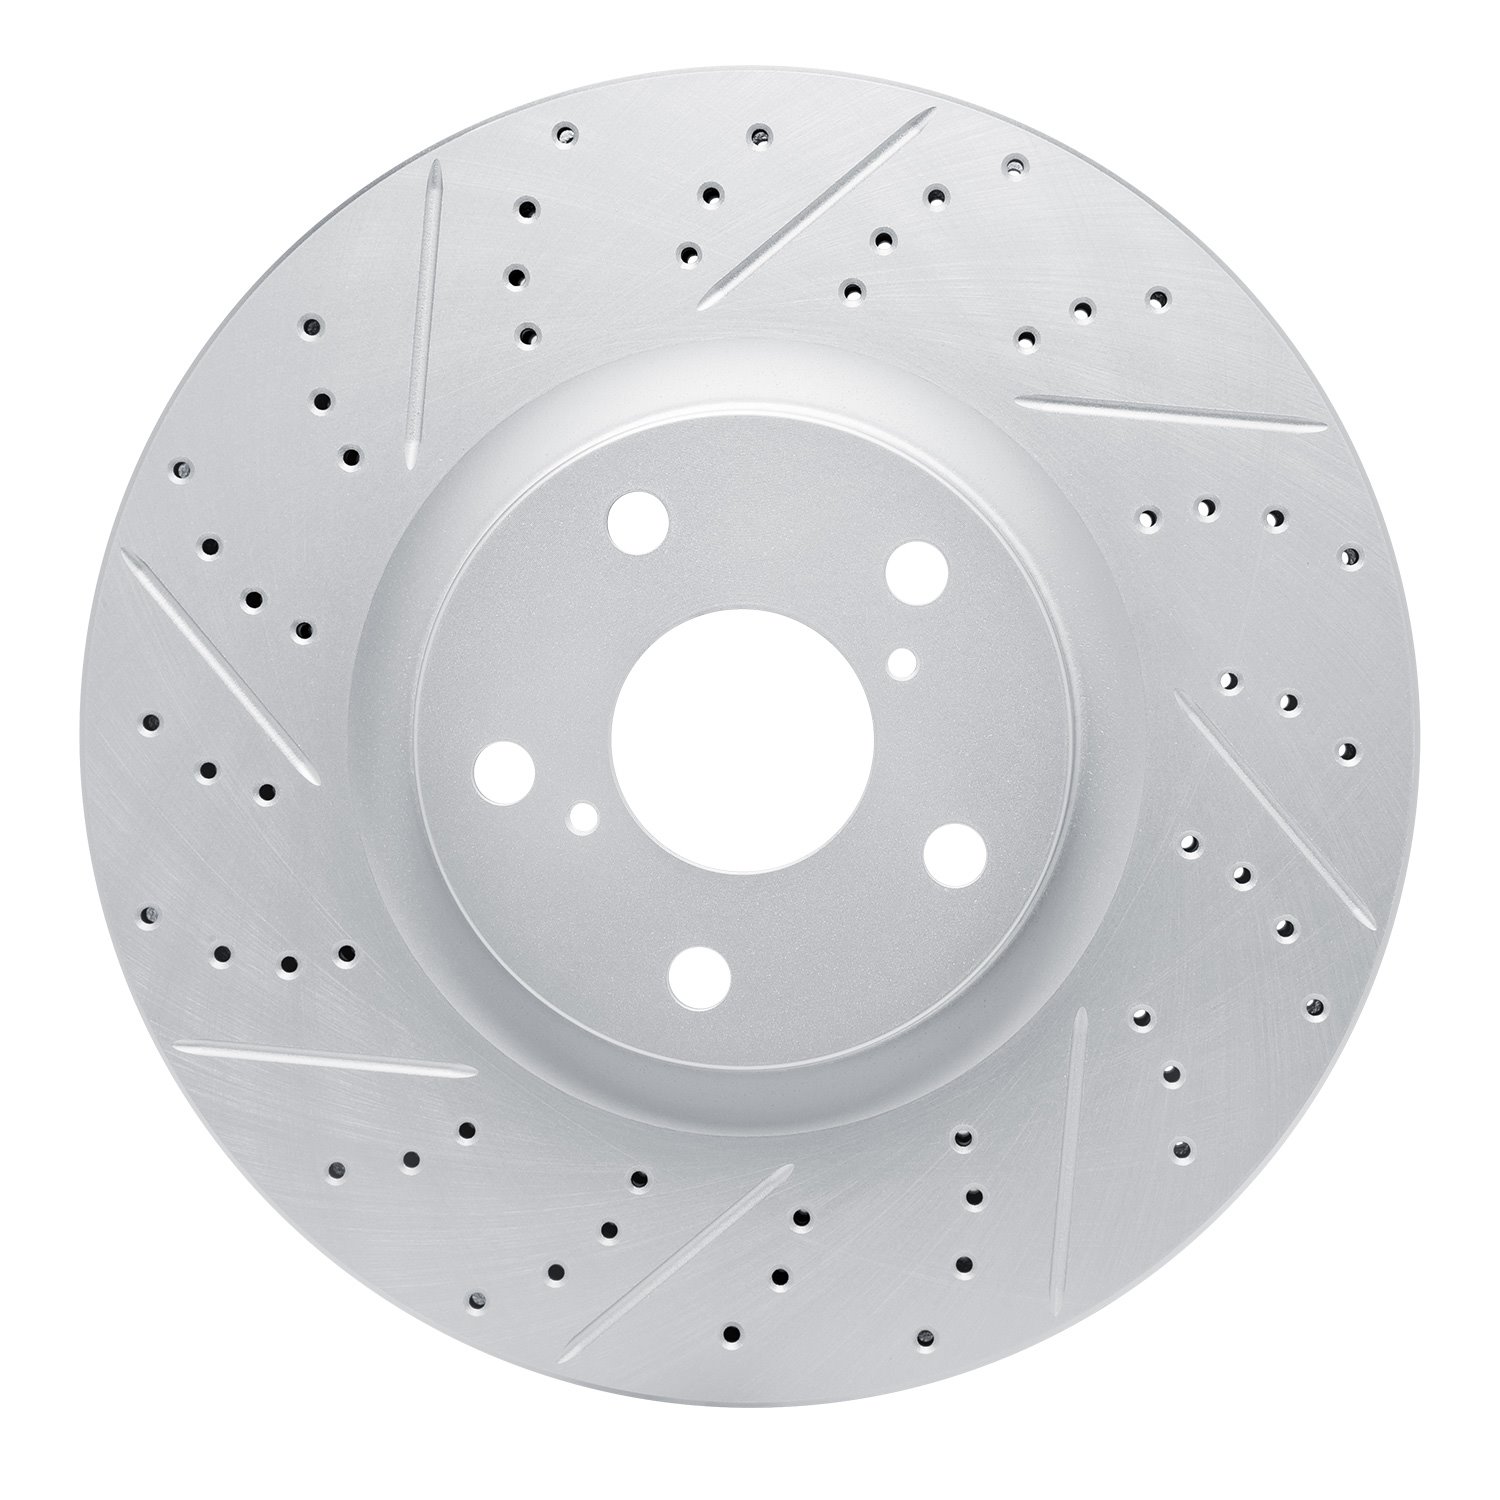 830-76063D Geoperformance Drilled/Slotted Brake Rotor, 1993-1998 Lexus/Toyota/Scion, Position: Right Front